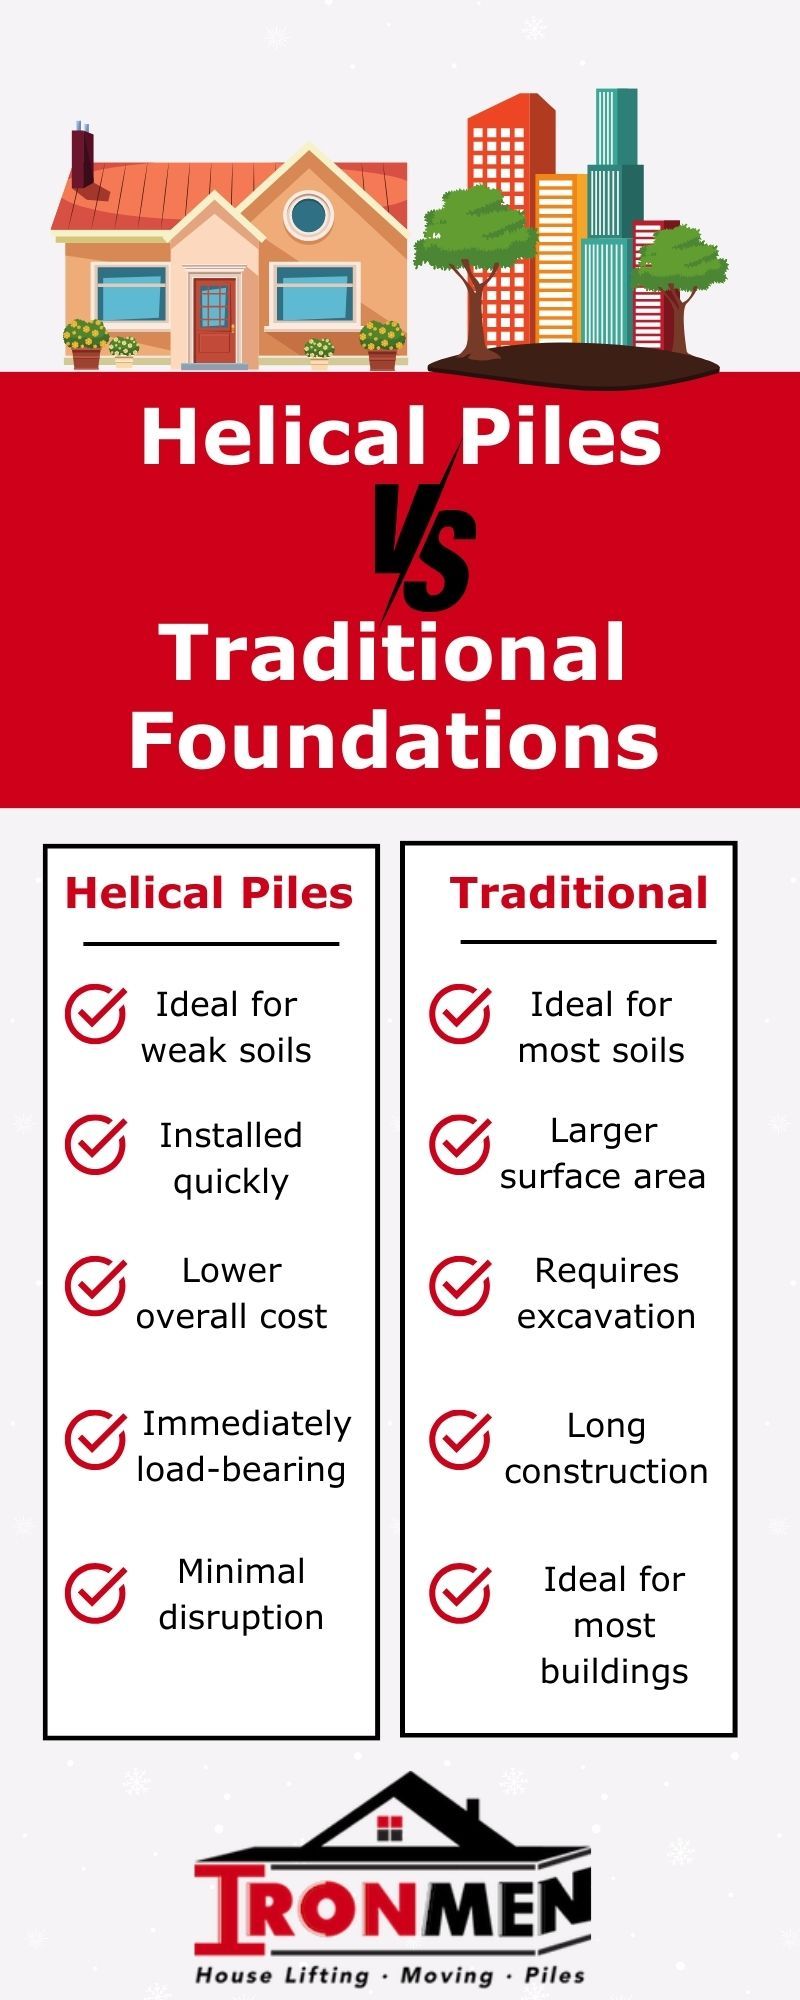 M38760 - Infographic - Helical Piles vs. Traditional Foundation Systems.jpg